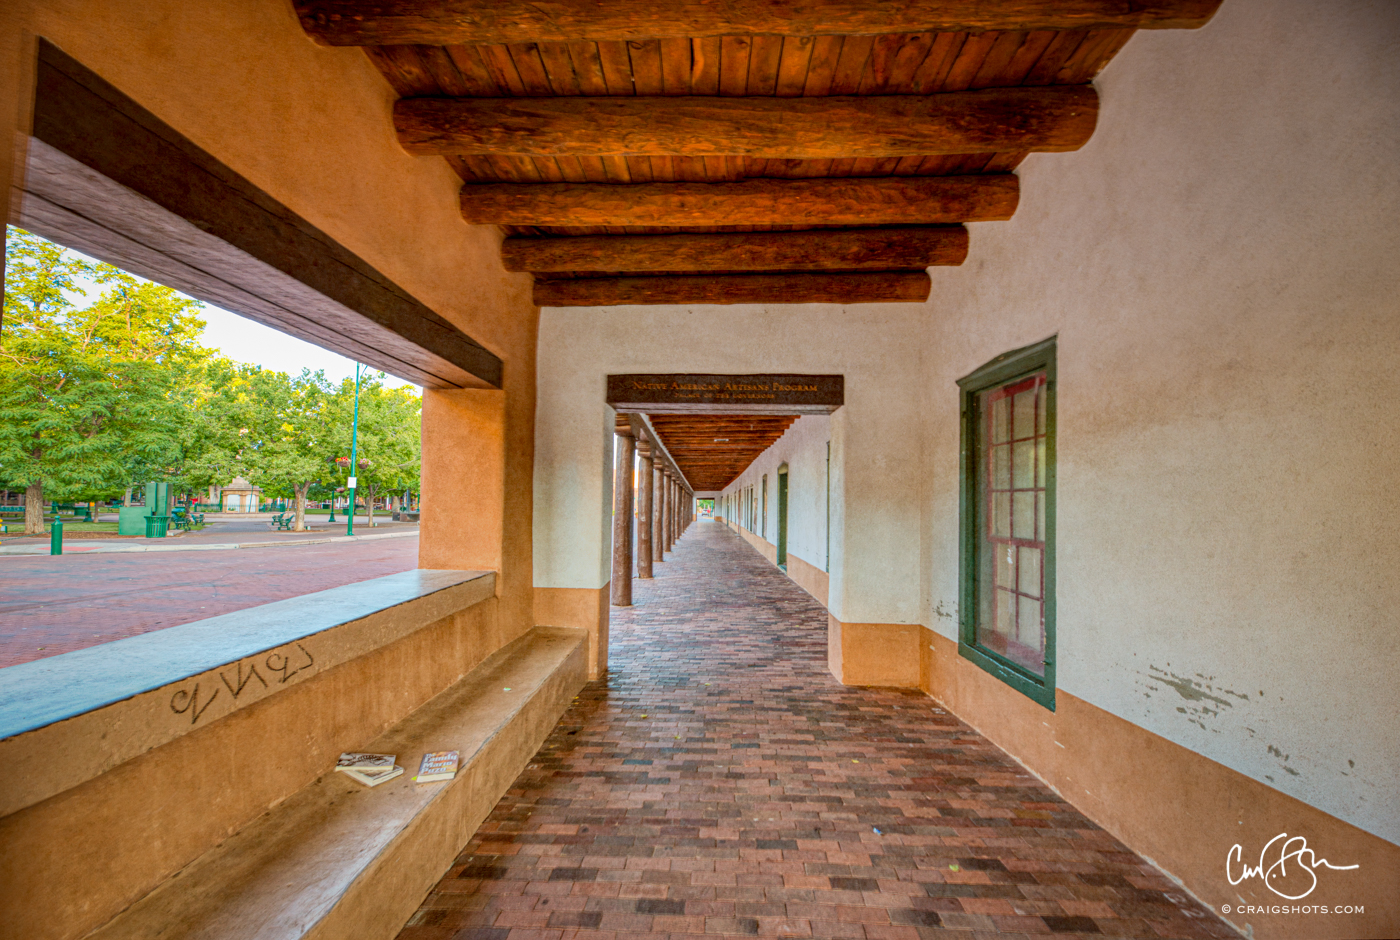 July 17:  Early Morning at the Palace of the Governors, Santa Fe